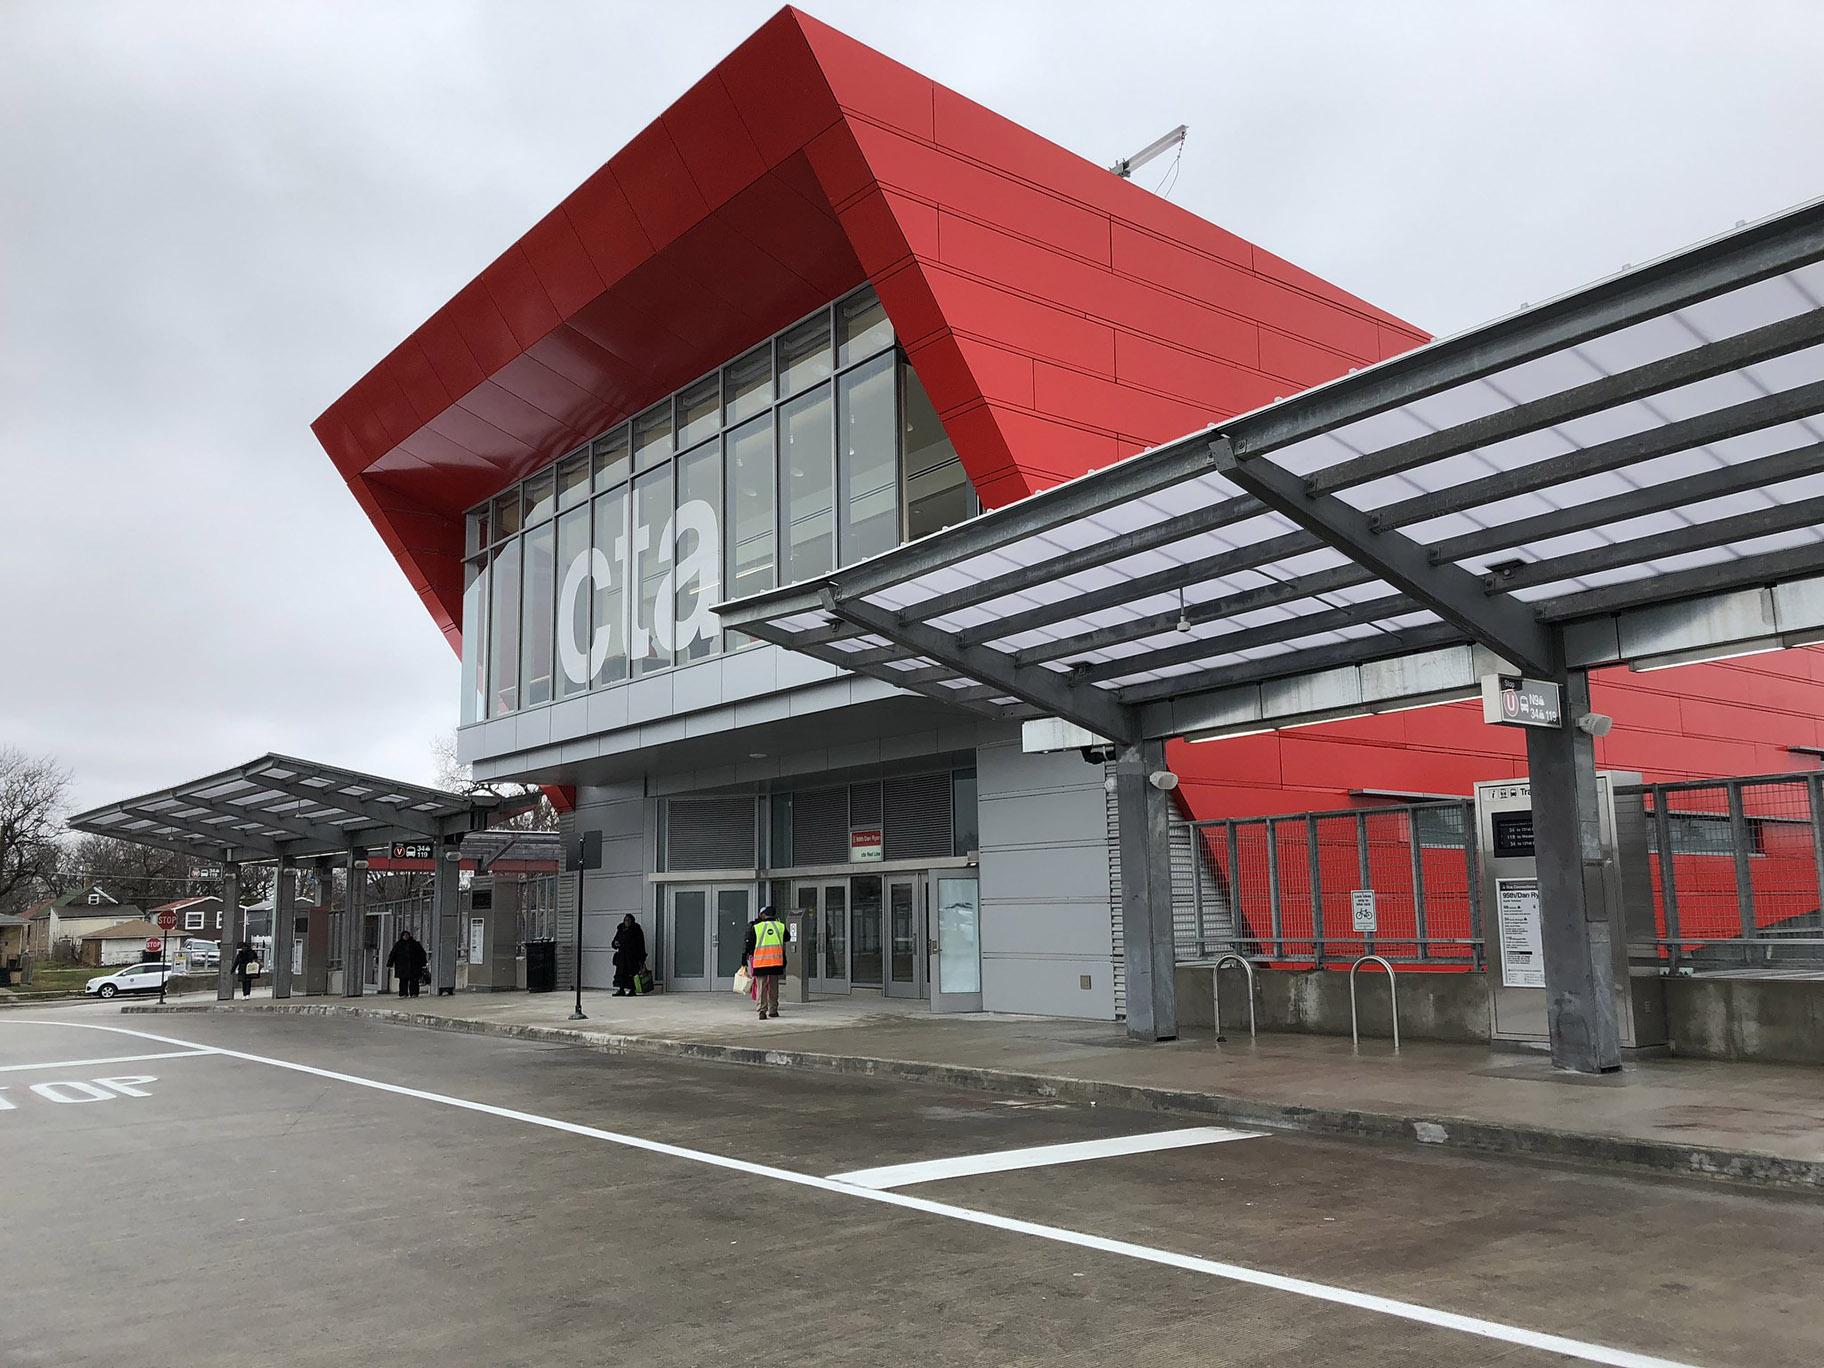 The CTA’s South Terminal at 95th/Dan Ryan on the Red Line opened in April 2018. A plan to extend the Red Line would connect the terminal to 130th Street. (Chicago Transit Authority / Flickr)